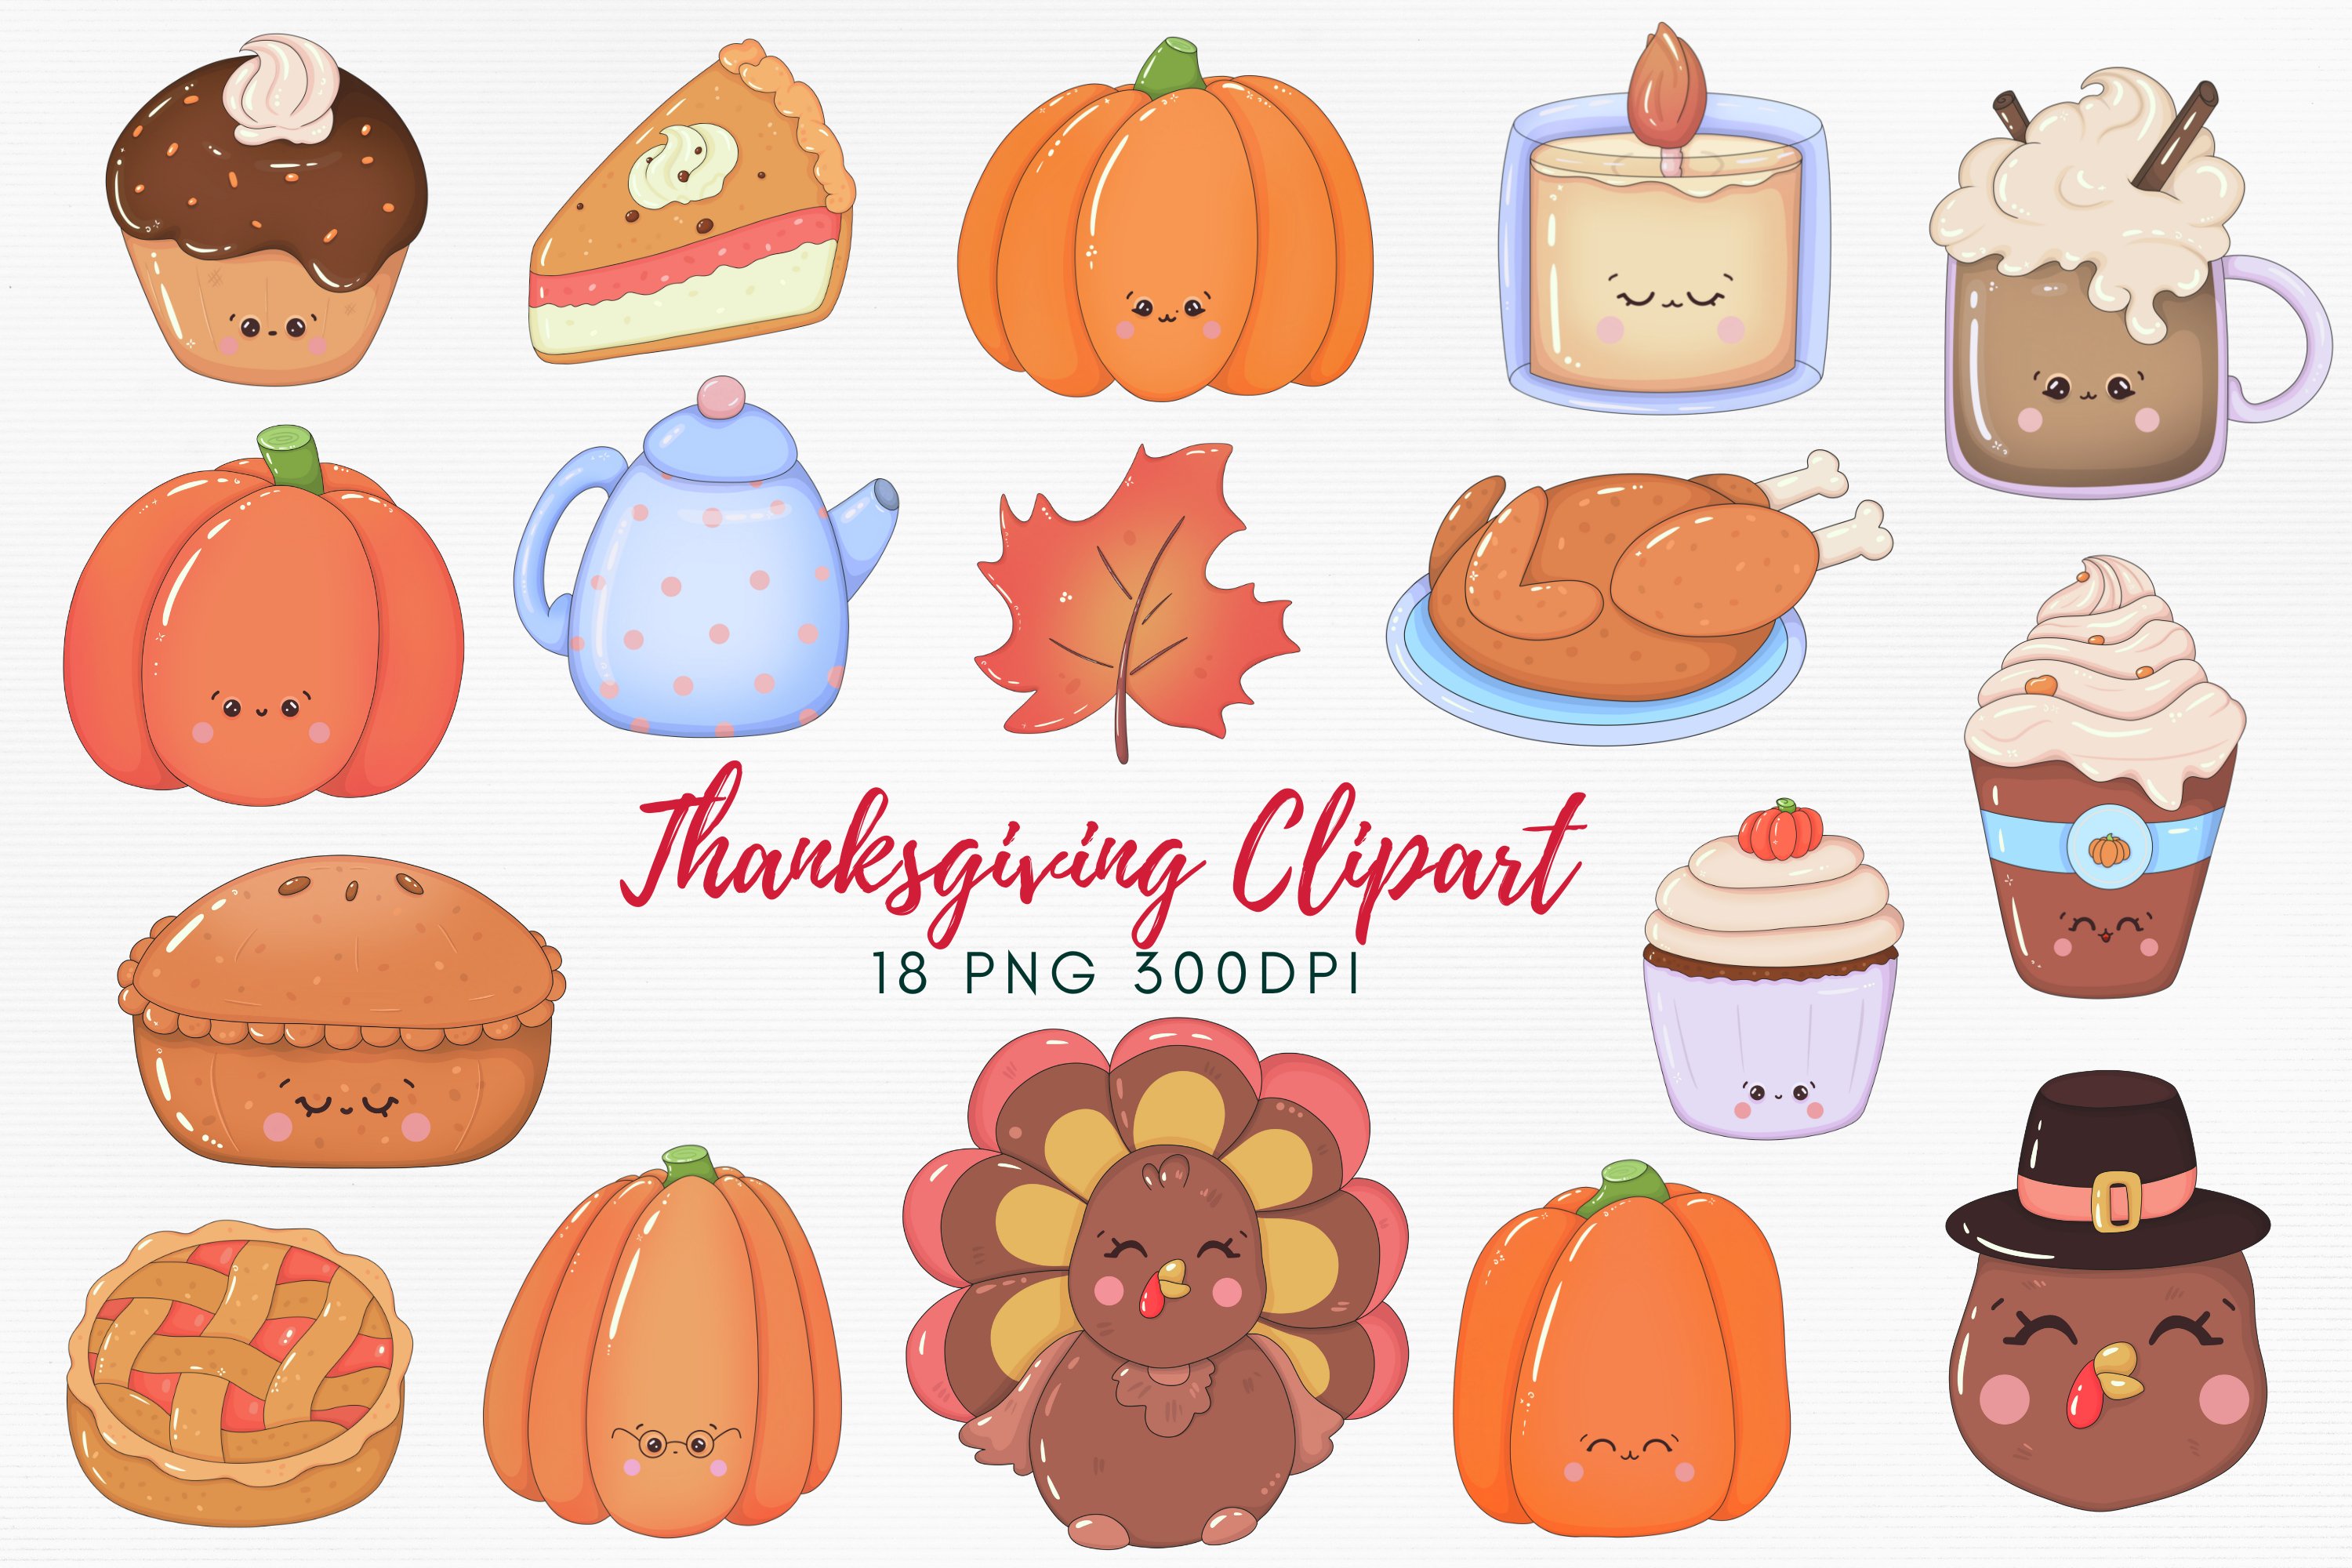 Pink lettering "Thanksgiving Clipart" and different colorful illustrations on a gray background.